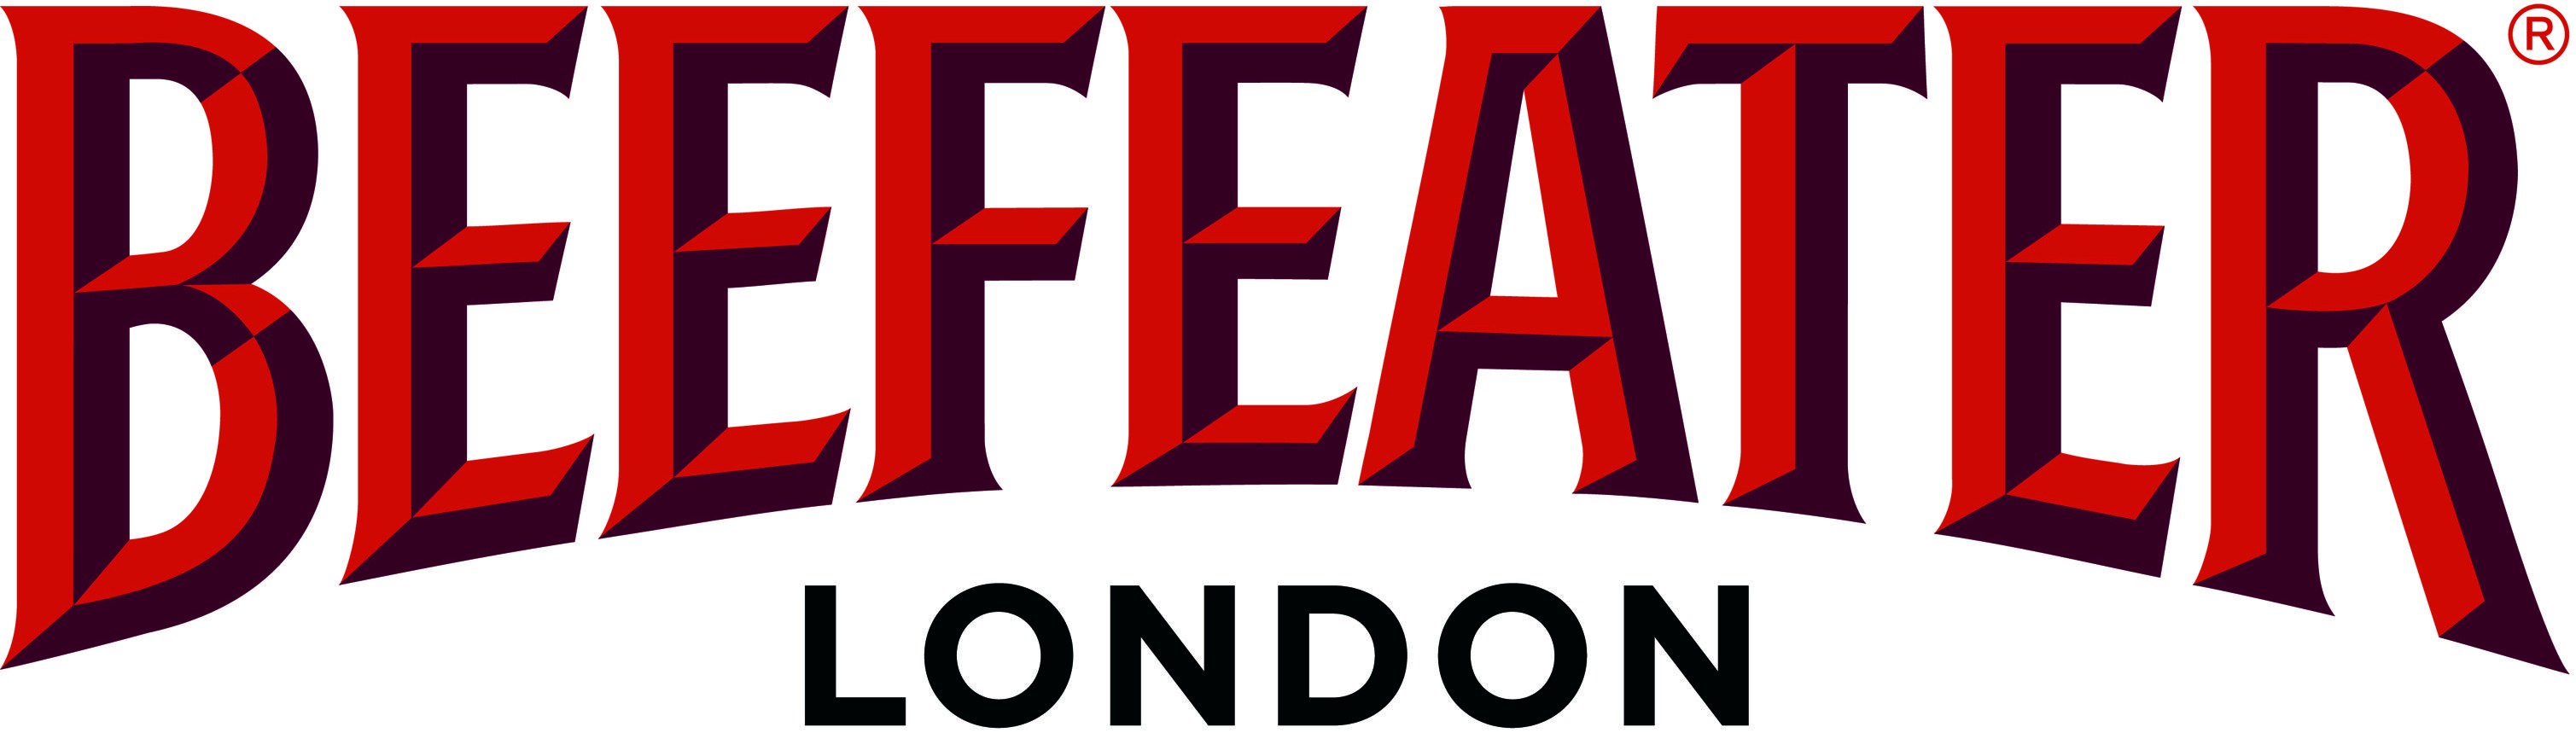 London_Beefeater-web